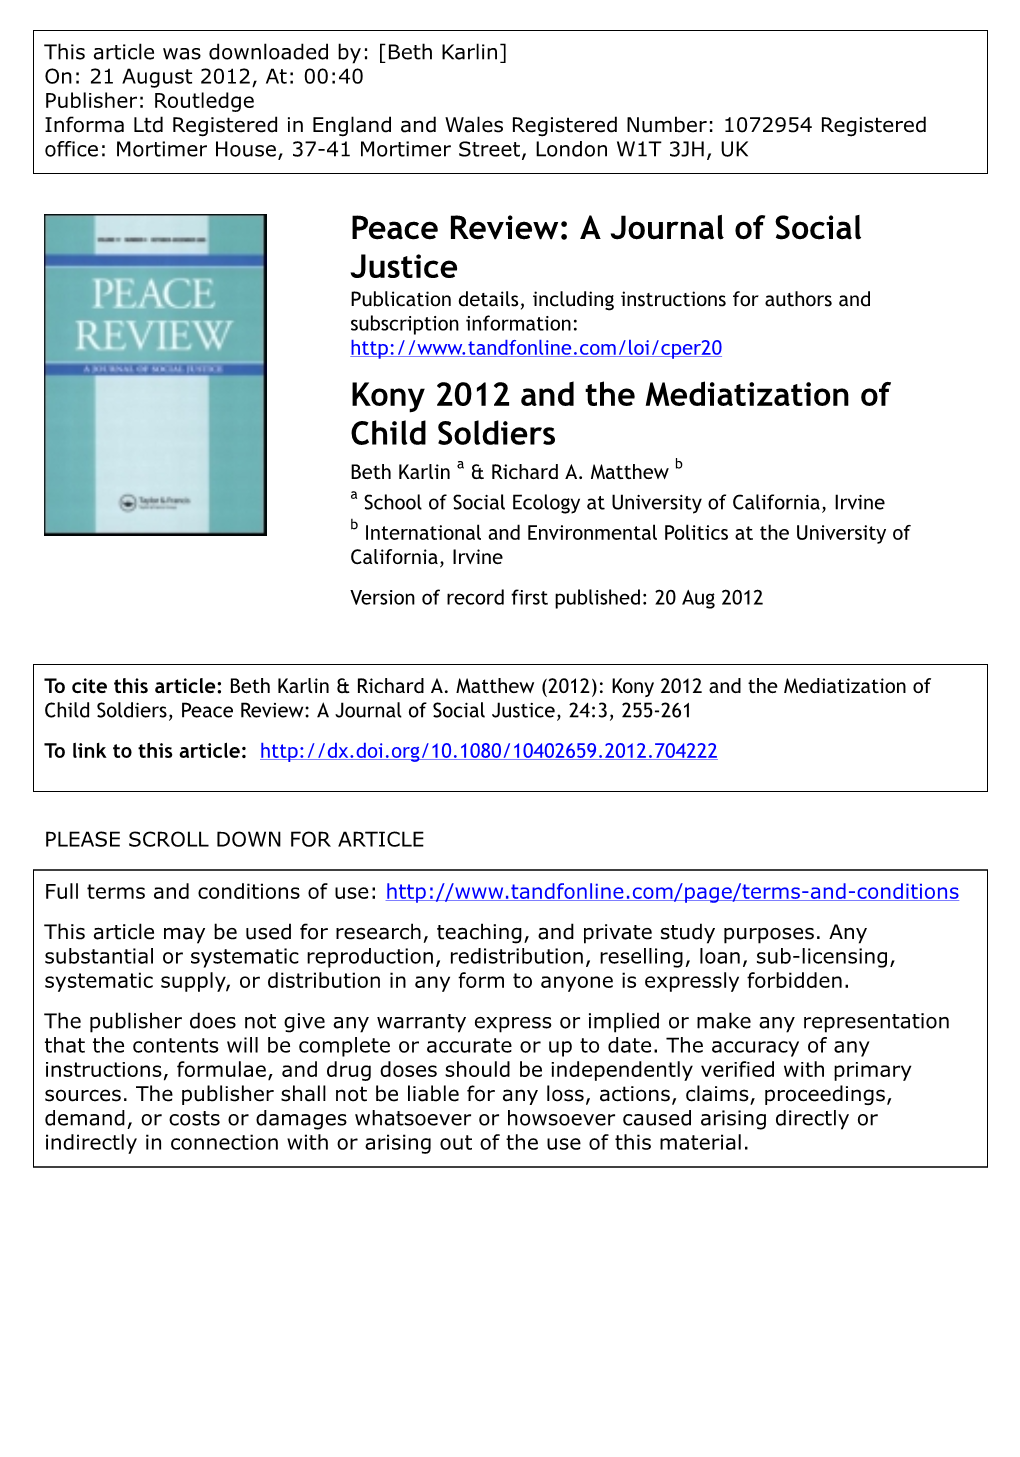 Kony 2012 and the Mediatization of Child Soldiers Beth Karlin a & Richard A